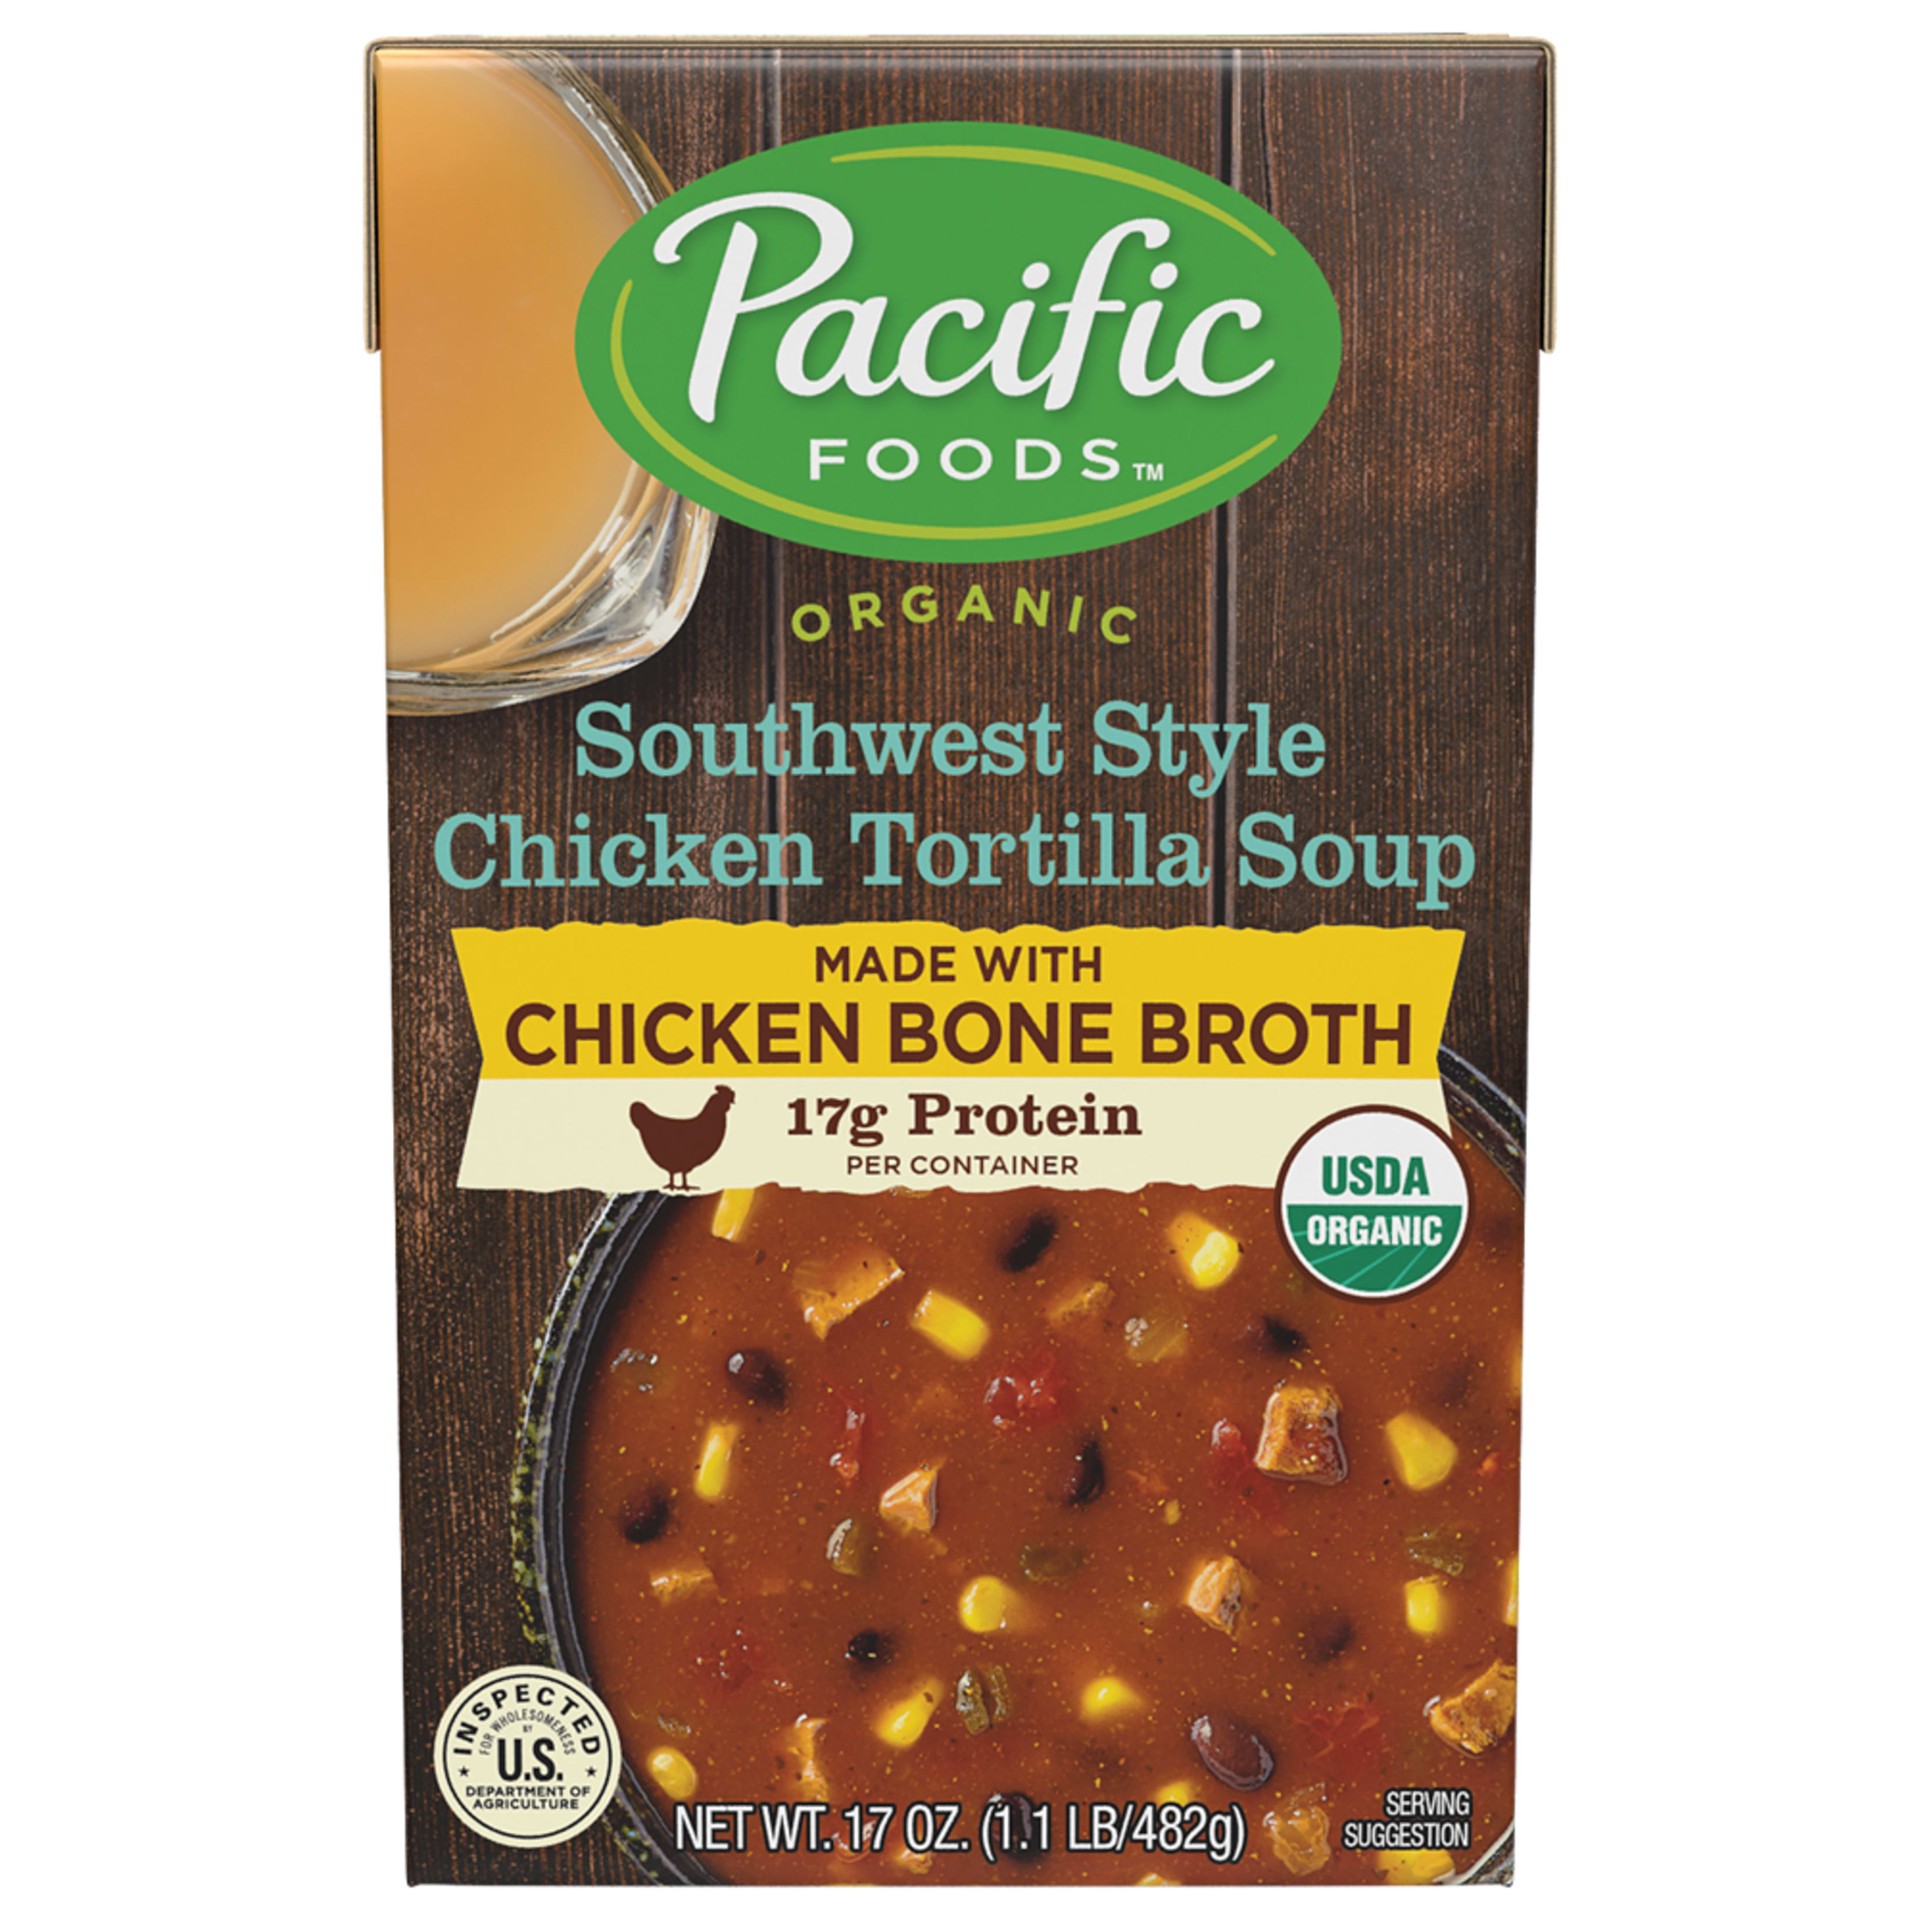 slide 1 of 5, Pacific Foods Organic Southwest Style Chicken Tortilla Soup with Chicken Bone Broth 17oz, 17 oz